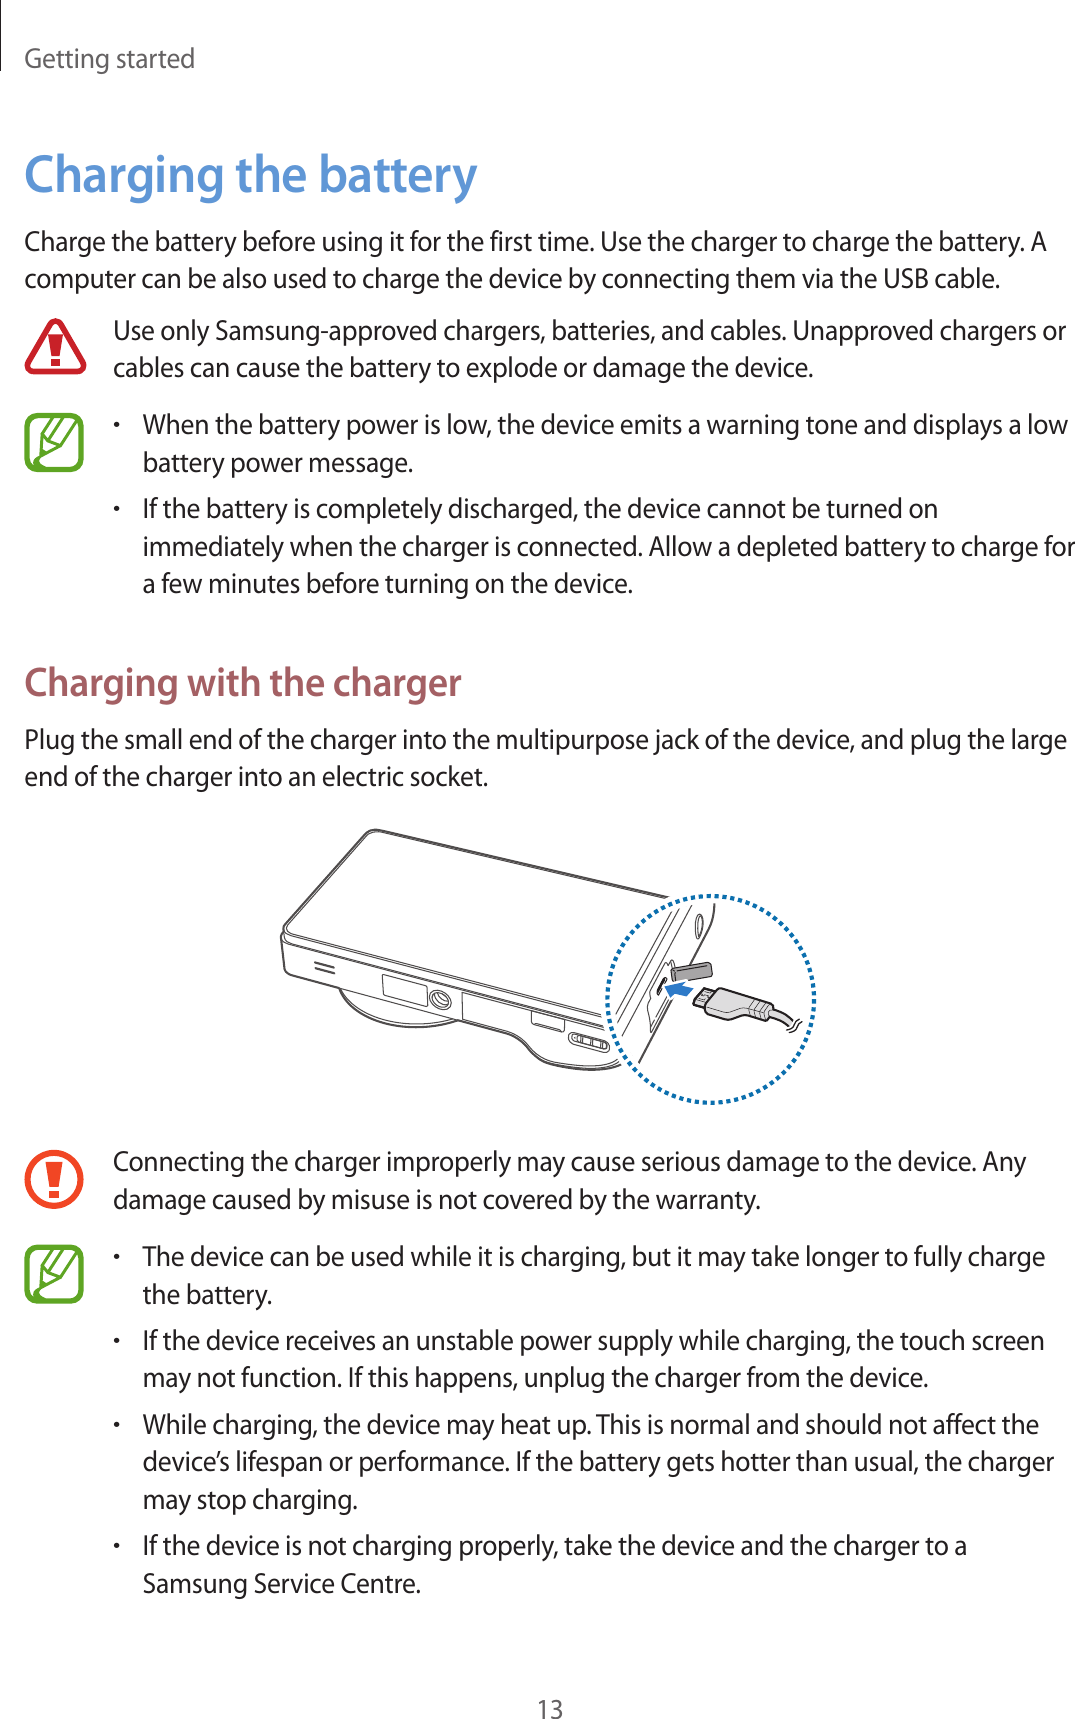 Getting started13Charging the batteryCharge the battery before using it for the first time. Use the charger to charge the battery. A computer can be also used to charge the device by connecting them via the USB cable.Use only Samsung-approved chargers, batteries, and cables. Unapproved chargers or cables can cause the battery to explode or damage the device.•When the battery power is low, the device emits a warning tone and displays a low battery power message.•If the battery is completely discharged, the device cannot be turned on immediately when the charger is connected. Allow a depleted battery to charge for a few minutes before turning on the device.Charging with the chargerPlug the small end of the charger into the multipurpose jack of the device, and plug the large end of the charger into an electric socket.Connecting the charger improperly may cause serious damage to the device. Any damage caused by misuse is not covered by the warranty.•The device can be used while it is charging, but it may take longer to fully charge the battery.•If the device receives an unstable power supply while charging, the touch screen may not function. If this happens, unplug the charger from the device.•While charging, the device may heat up. This is normal and should not affect the device’s lifespan or performance. If the battery gets hotter than usual, the charger may stop charging.•If the device is not charging properly, take the device and the charger to a Samsung Service Centre.